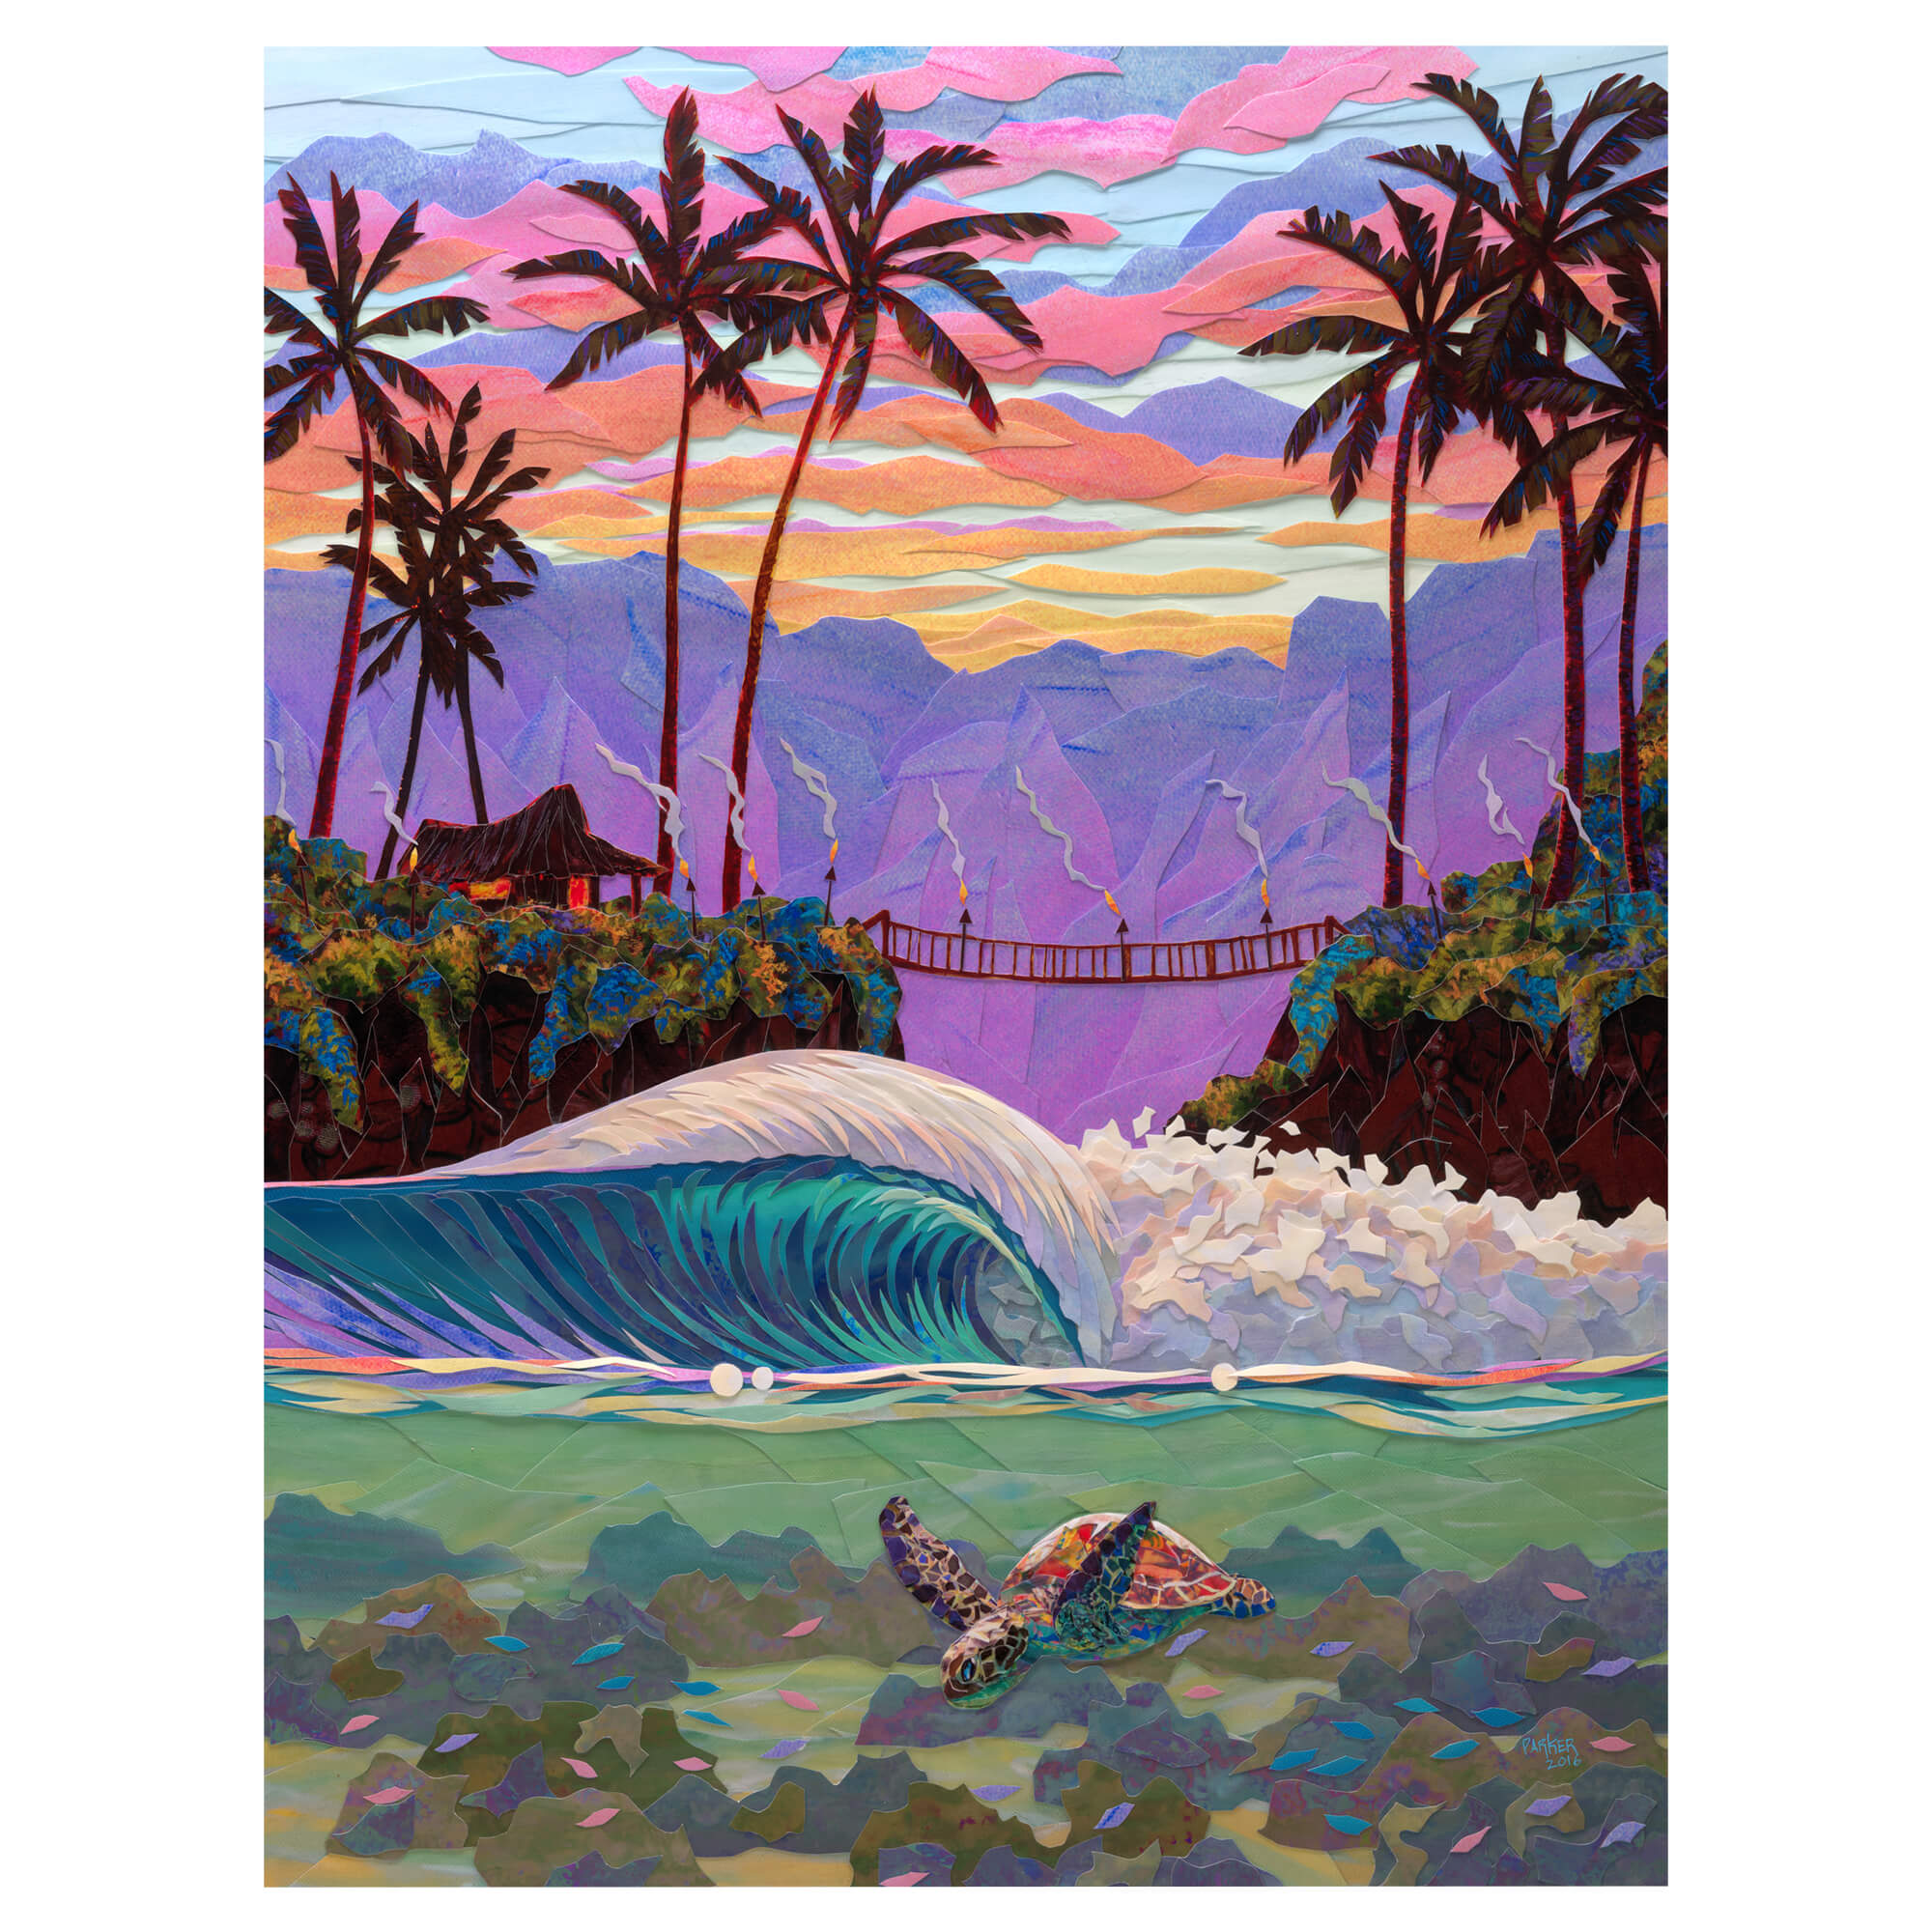 A canvas giclée art print featuring a collage of a beautiful seascape with a sea turtle swimming, a hut, and a gradient purple-pink-hued mountain background by Hawaii artist Patrick Parker